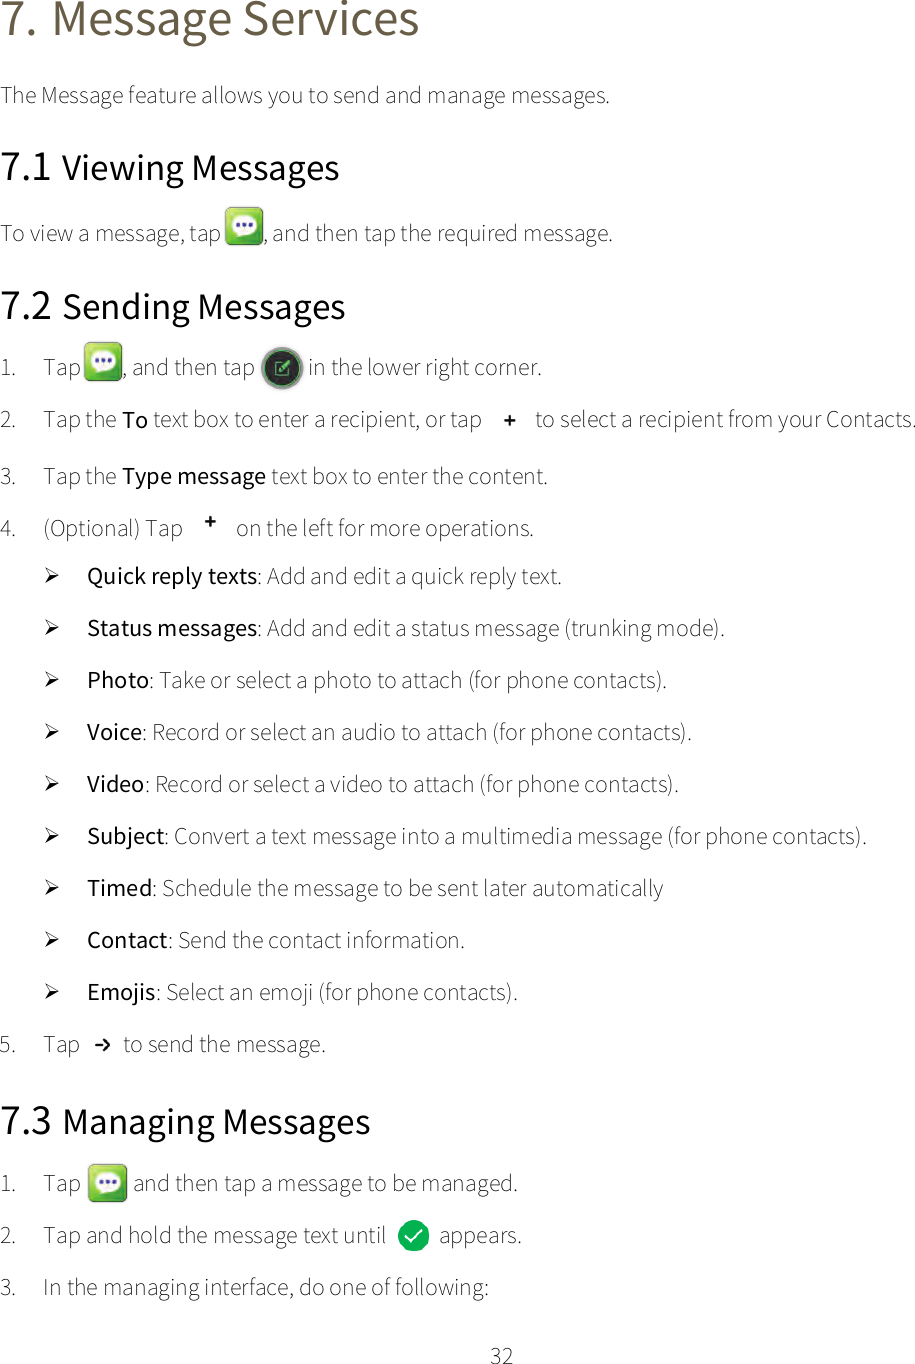    32  7. Message Services The Message feature allows you to send and manage messages. 7.1 Viewing Messages To view a message, tap  , and then tap the required message. 7.2 Sending Messages 1. Tap , and then tap    in the lower right corner. 2. Tap the To text box to enter a recipient, or tap  to select a recipient from your Contacts. 3. Tap the Type message text box to enter the content. 4. (Optional) Tap  on the left for more operations.  Quick reply texts: Add and edit a quick reply text.  Status messages: Add and edit a status message (trunking mode).  Photo: Take or select a photo to attach (for phone contacts).  Voice: Record or select an audio to attach (for phone contacts).  Video: Record or select a video to attach (for phone contacts).  Subject: Convert a text message into a multimedia message (for phone contacts).  Timed: Schedule the message to be sent later automatically  Contact: Send the contact information.  Emojis: Select an emoji (for phone contacts). 5. Tap to send the message. 7.3 Managing Messages 1. Tap    and then tap a message to be managed. 2. Tap and hold the message text until   appears. 3. In the managing interface, do one of following: 